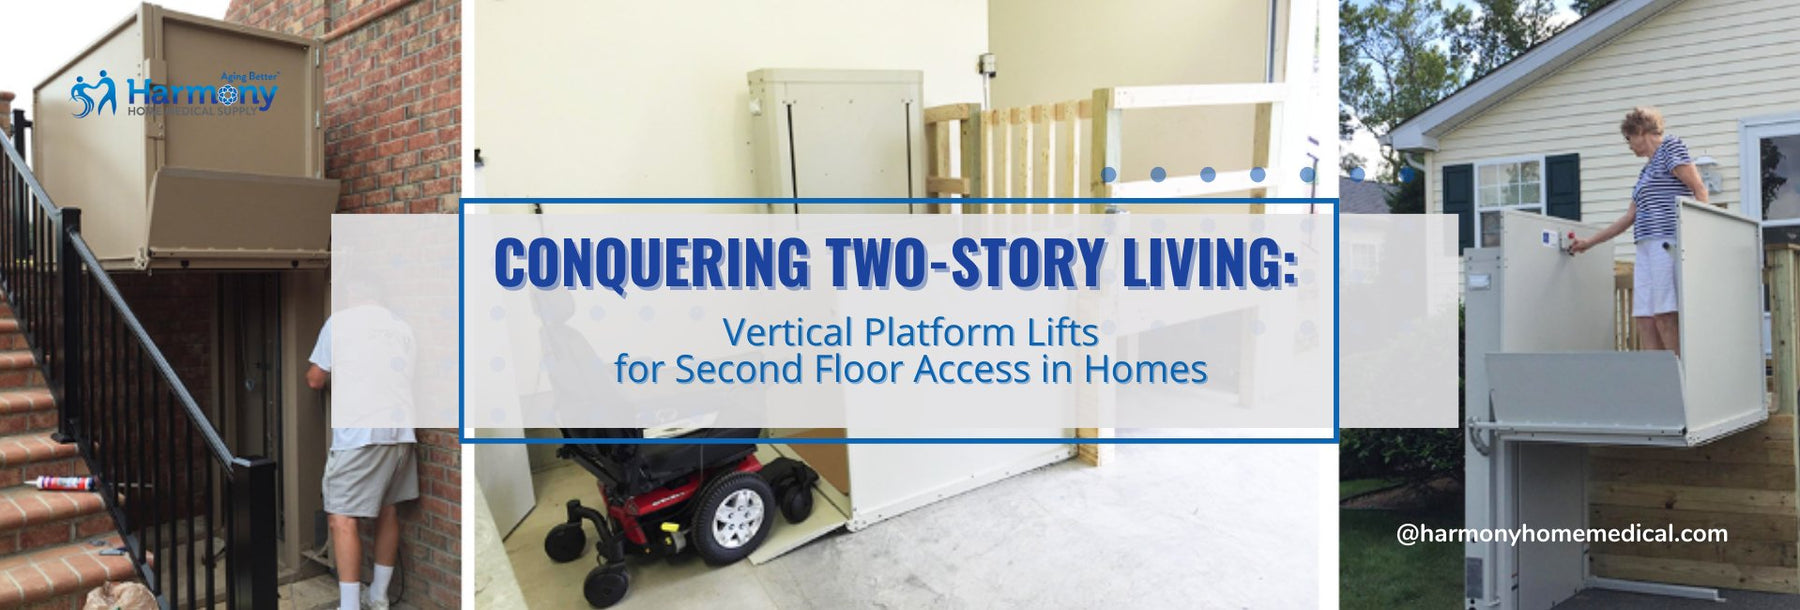 Conquering Two-Story Living: Vertical Platform Lifts for Second Floor Access in Homes - Harmony Home Medical Supply